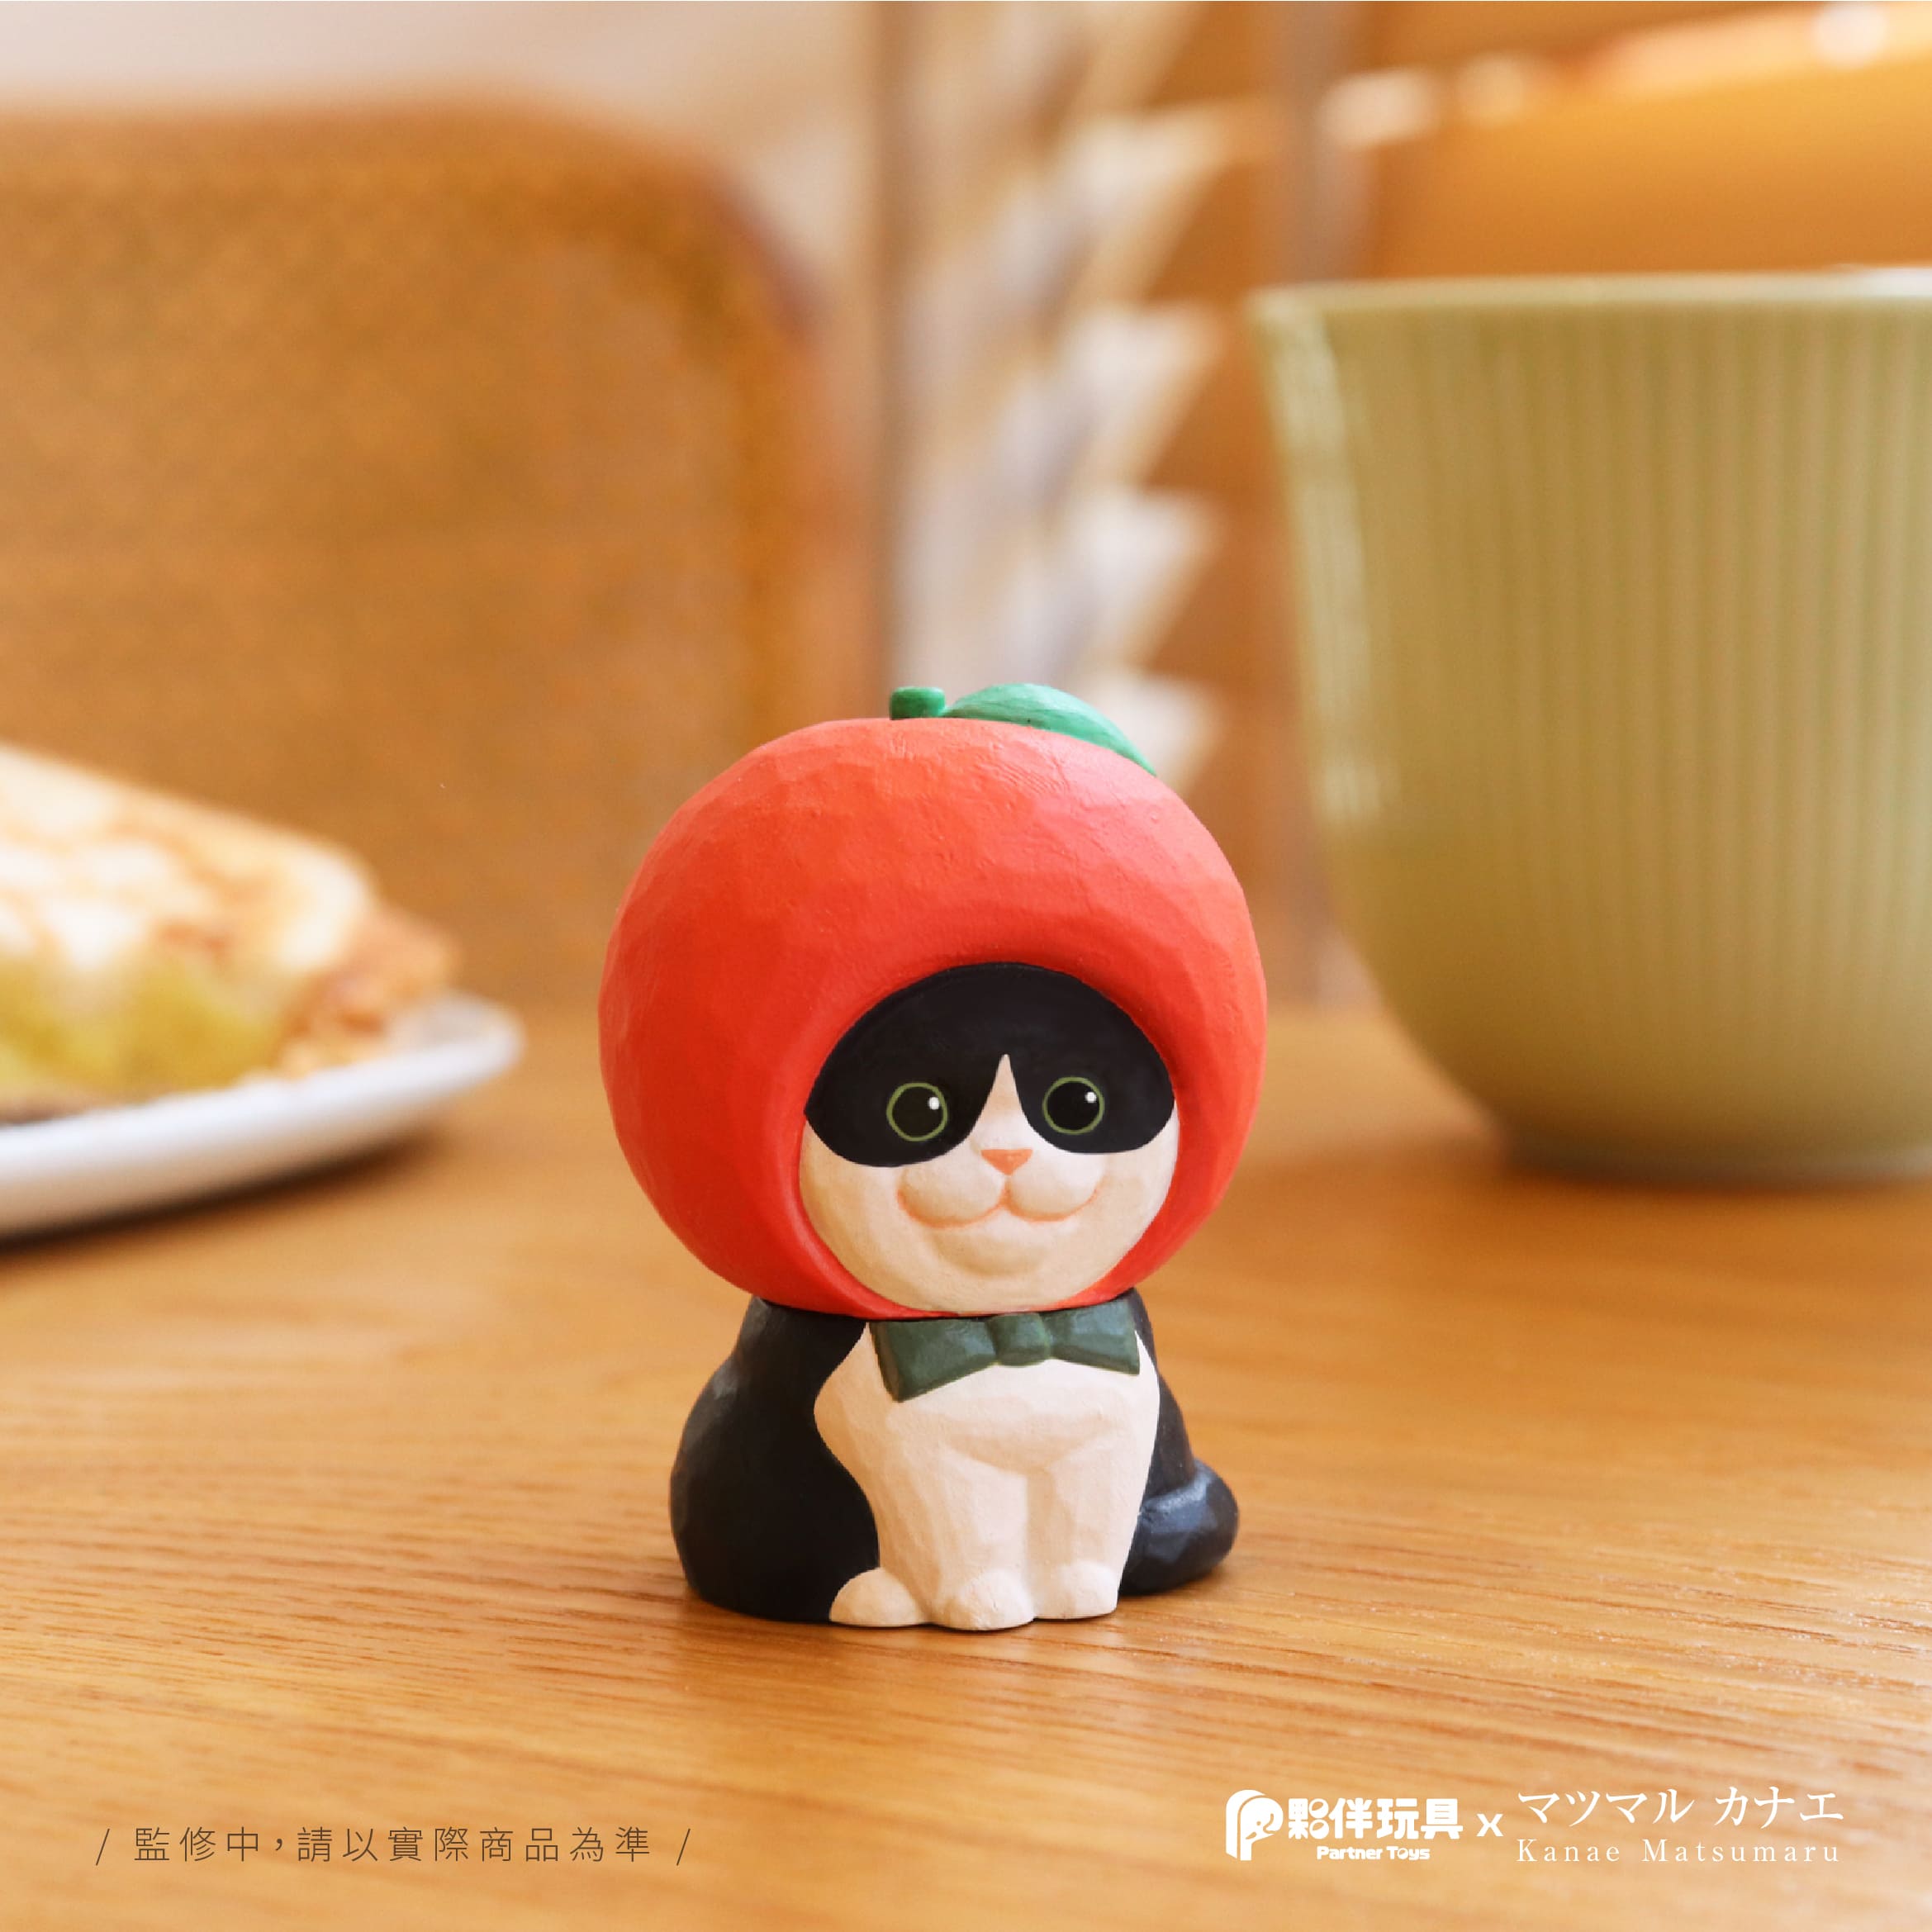 A small figurine of Matsu's cats with a hat on a table, part of a blind box series.